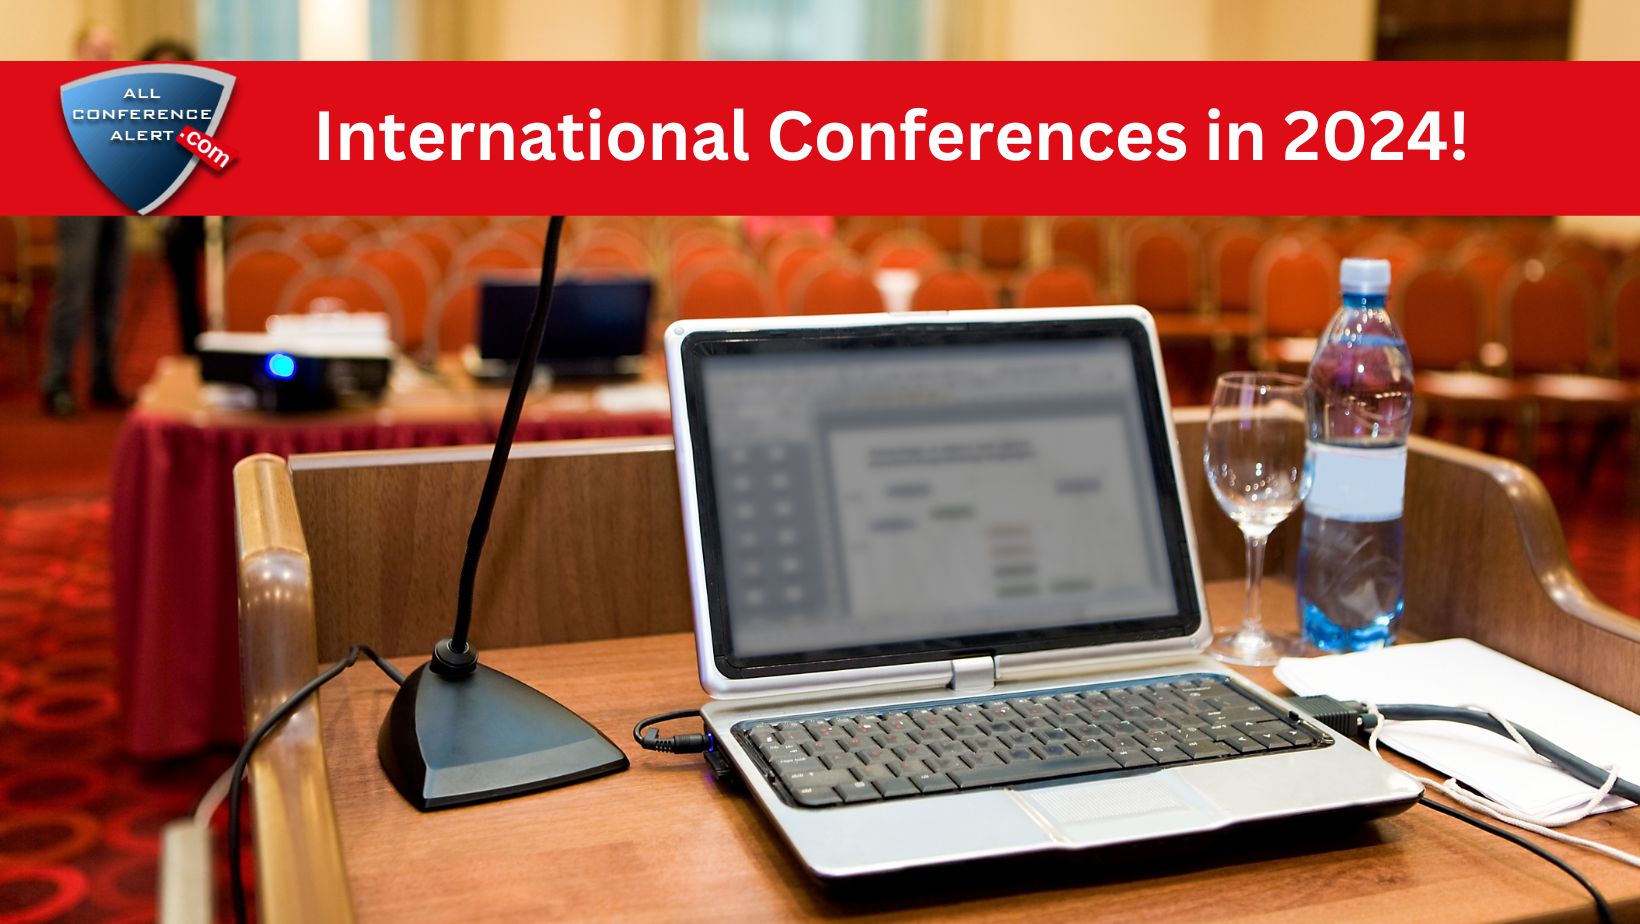 Find and Join the Best International Conferences in 2024!